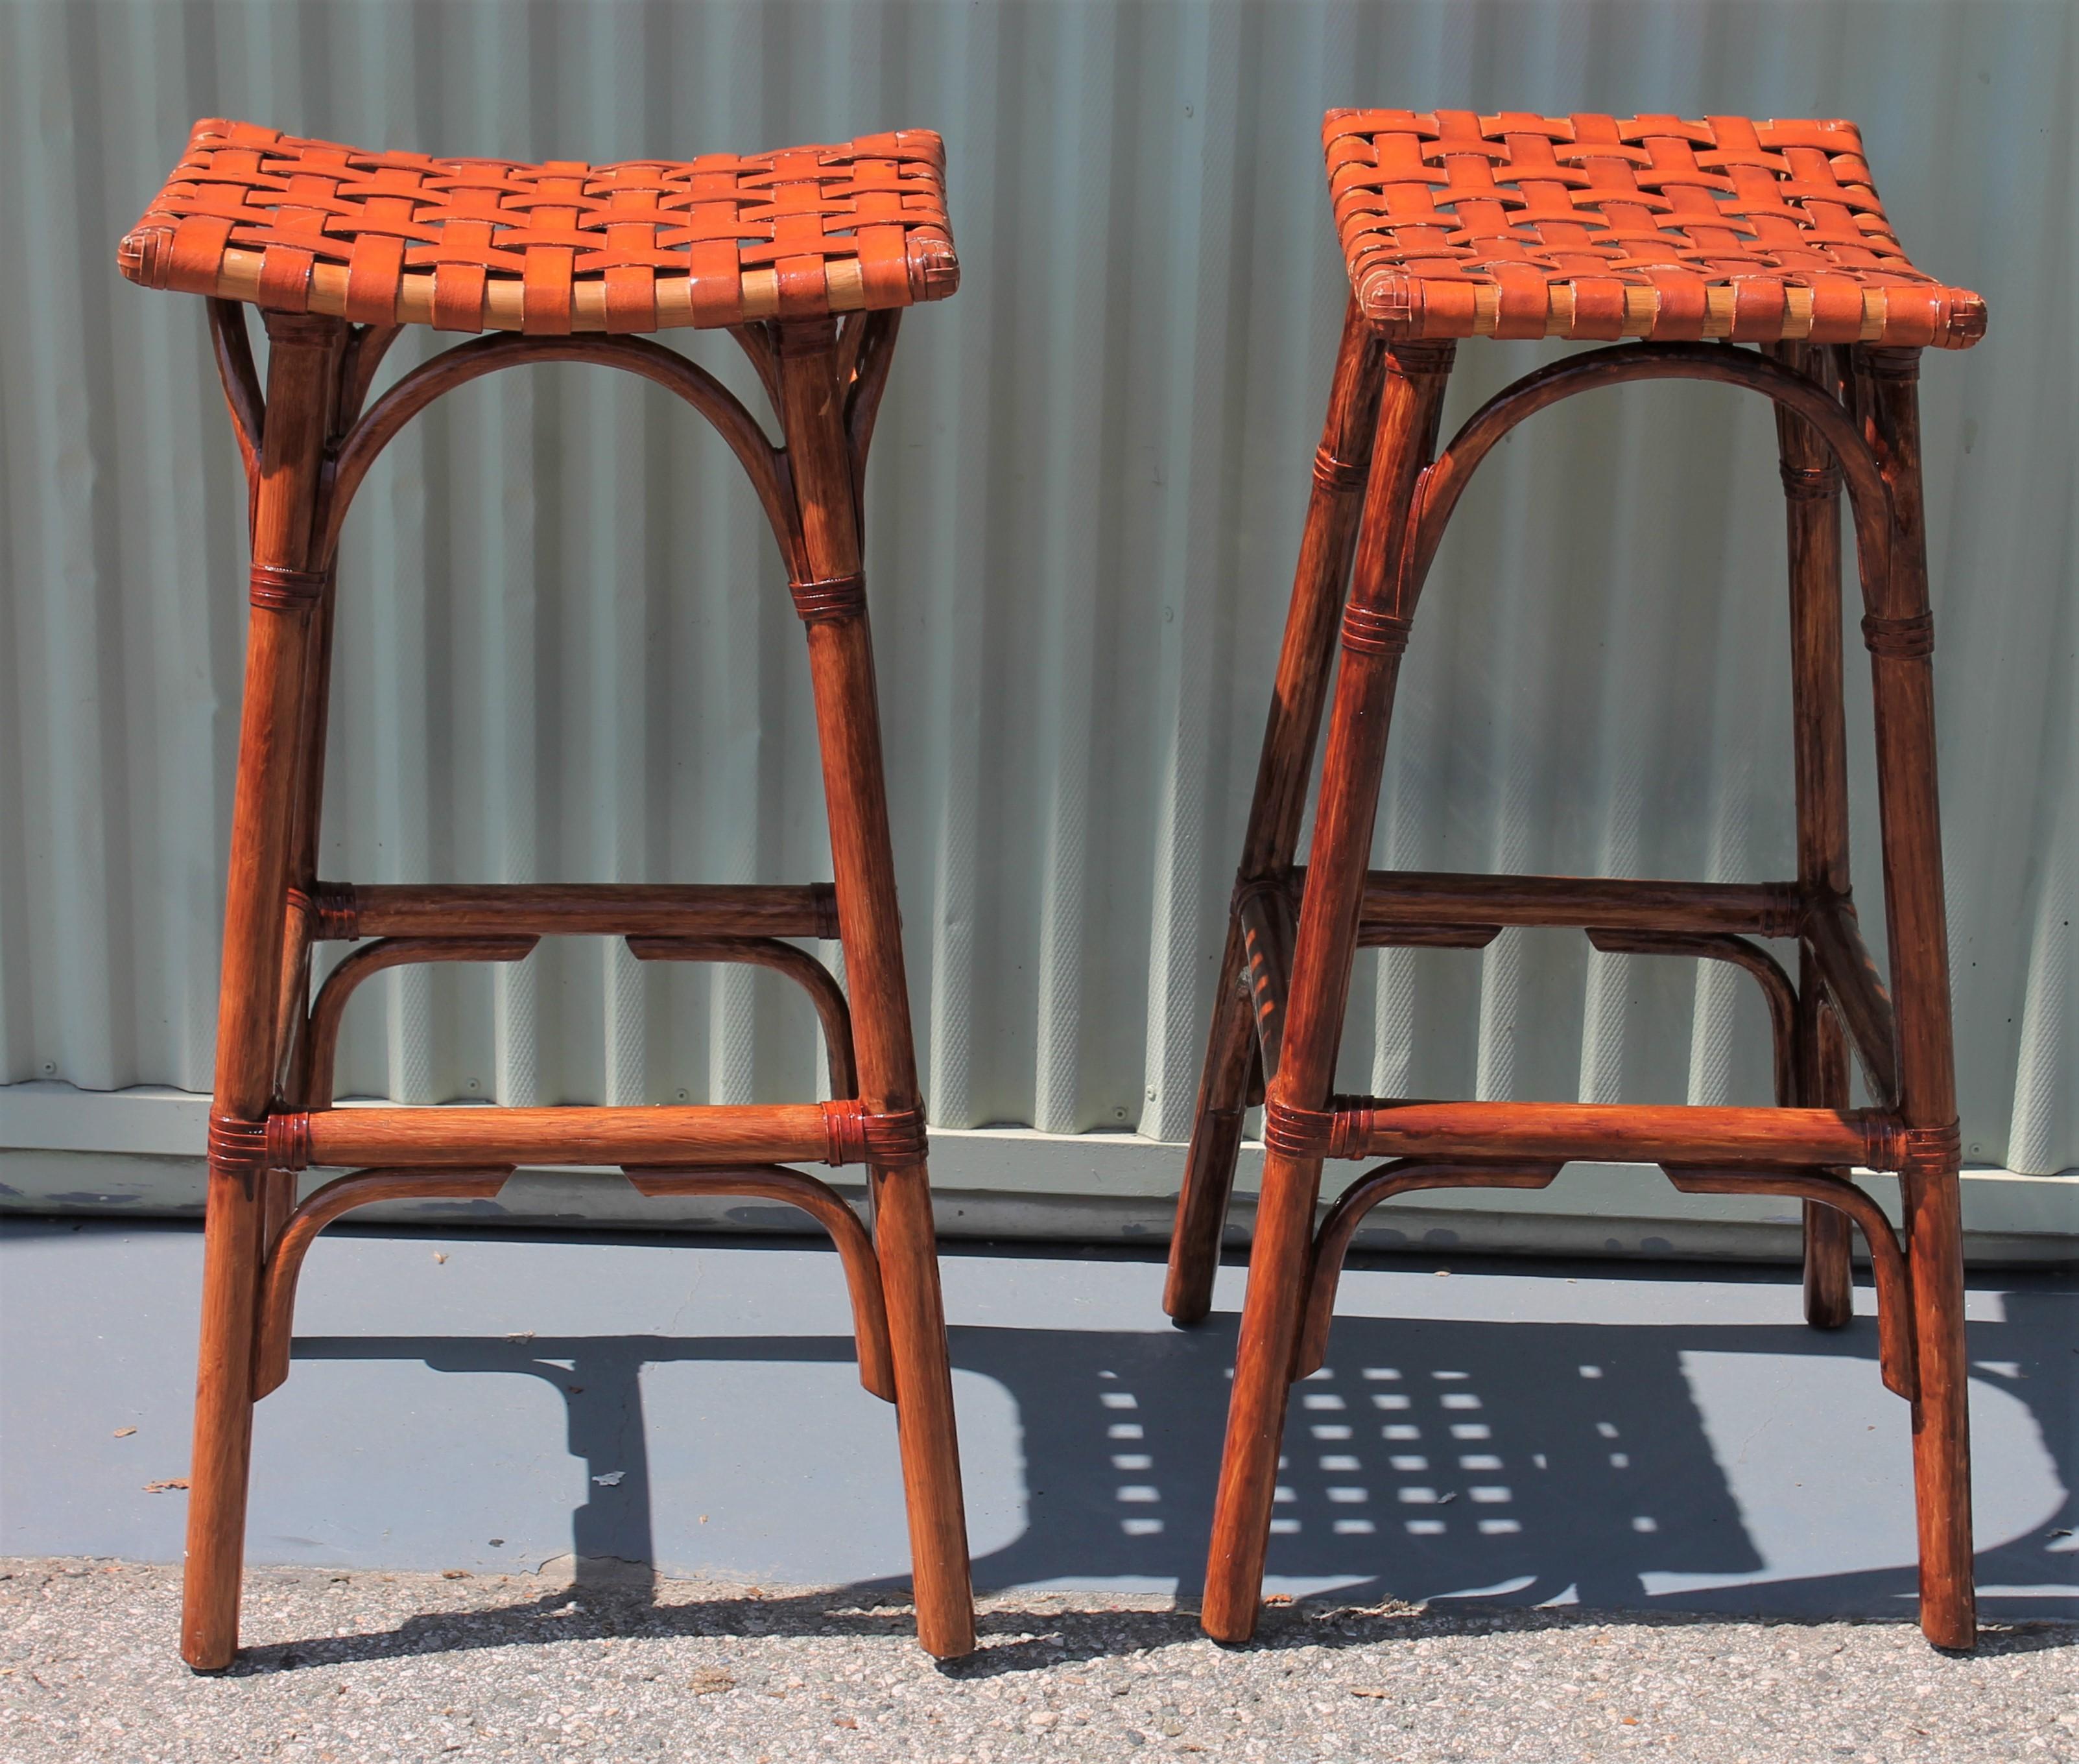 American Craftsman Bamboo Bar Stools with Leather Seats, Pair